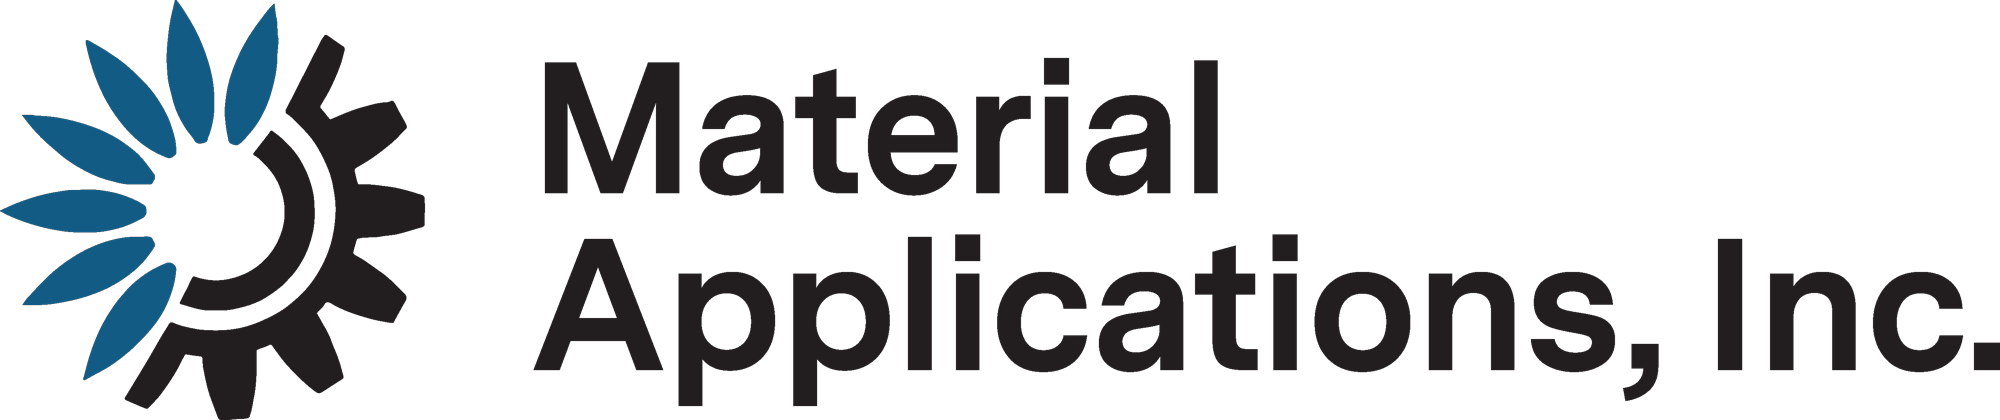 Material Applications